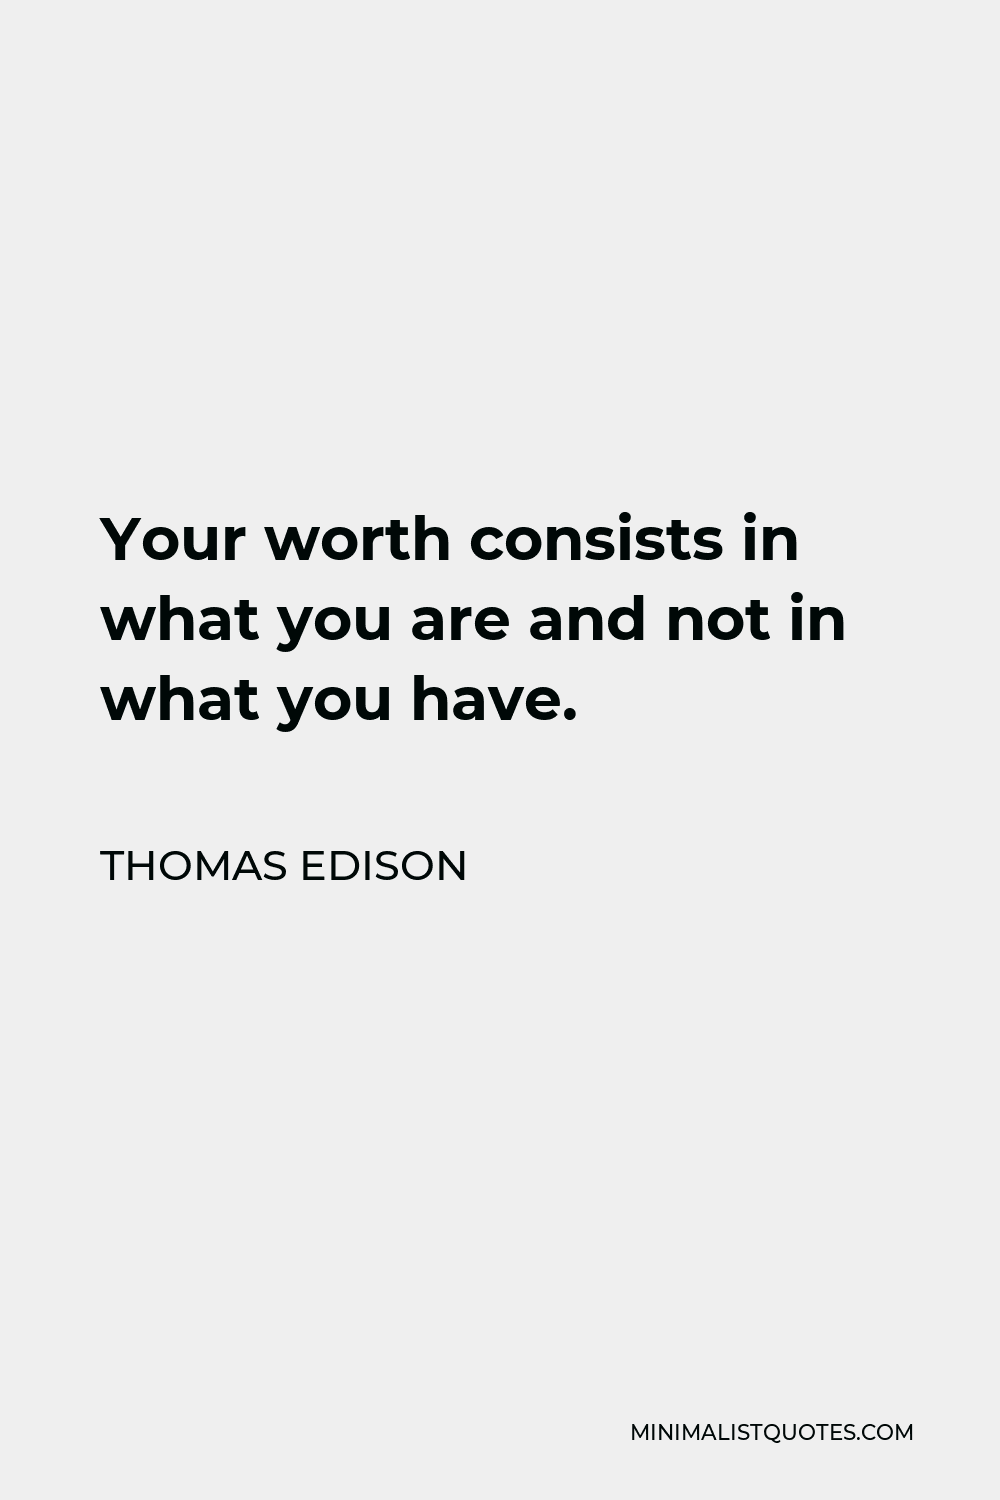 Thomas Edison Quote - Your worth consists in what you are and not in what you have.